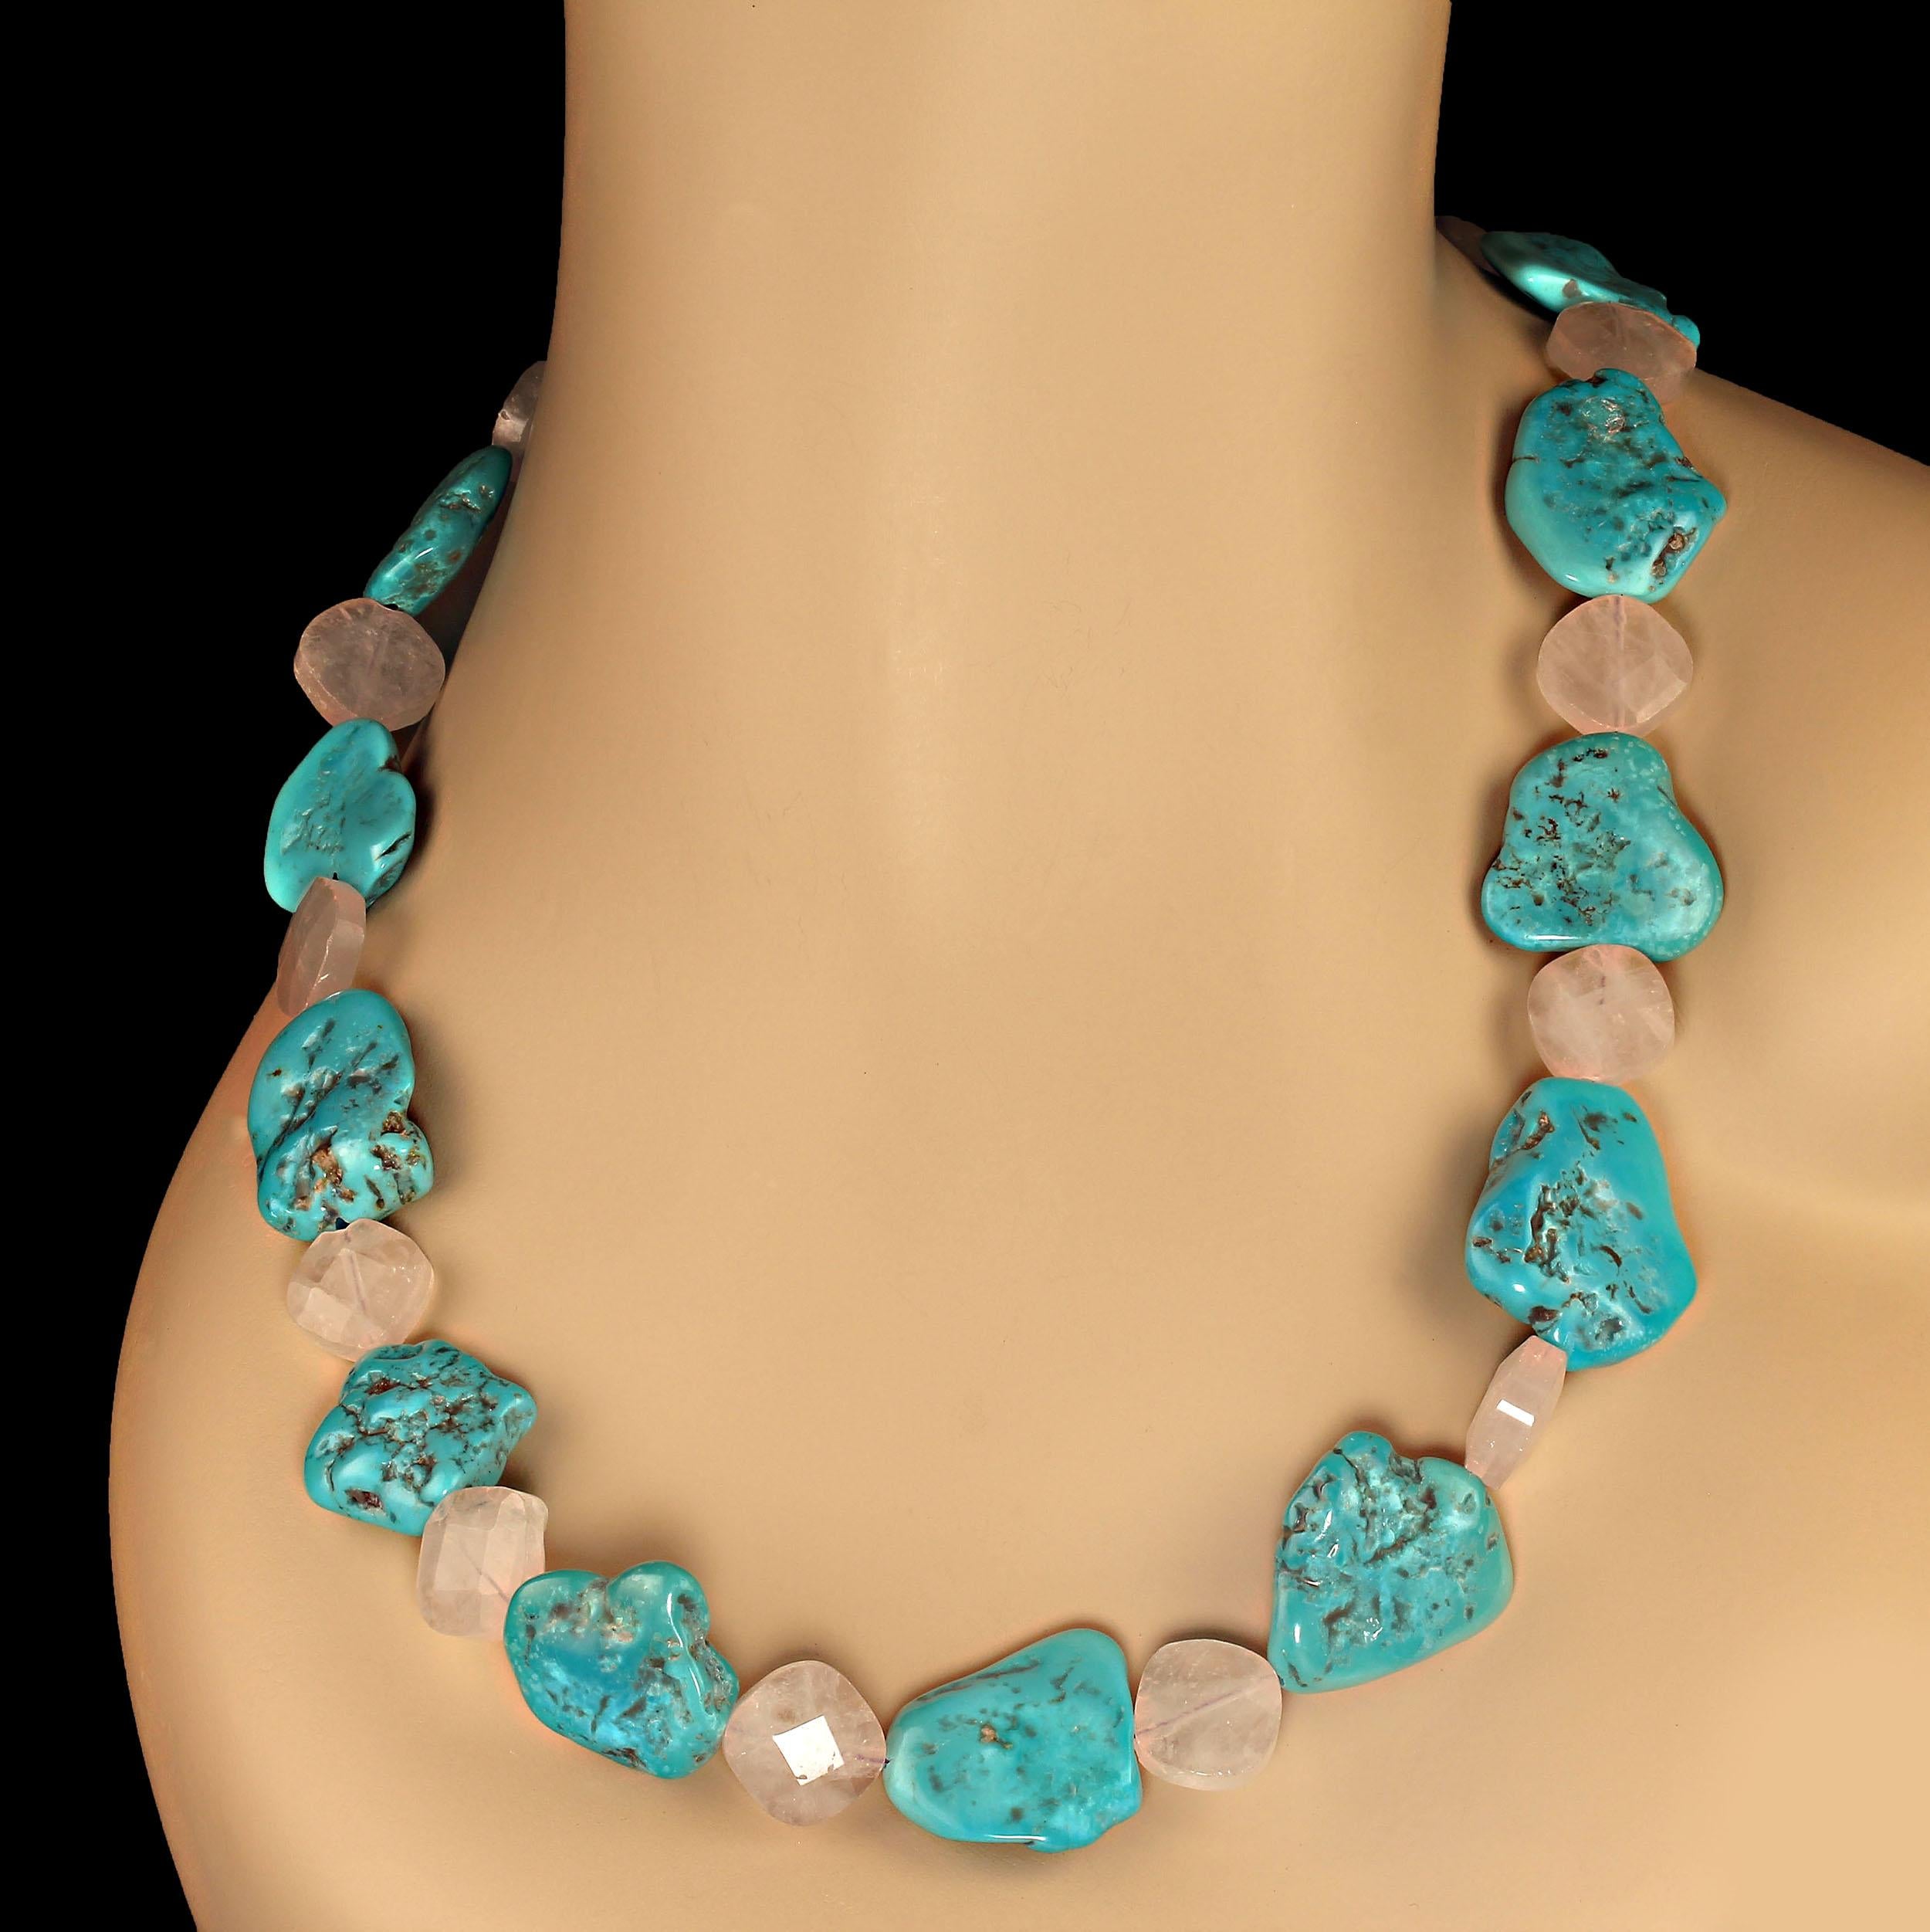 29 Inches of Gorgeous Sleeping Beauty turquoise tablets. 21x21mm, and rose quartz squares with checkerboard tables, 14x14mm. The combination of shade of Sleeping Beauty turquoise and rose quartz is dramatic and elegant. The necklace is secured with